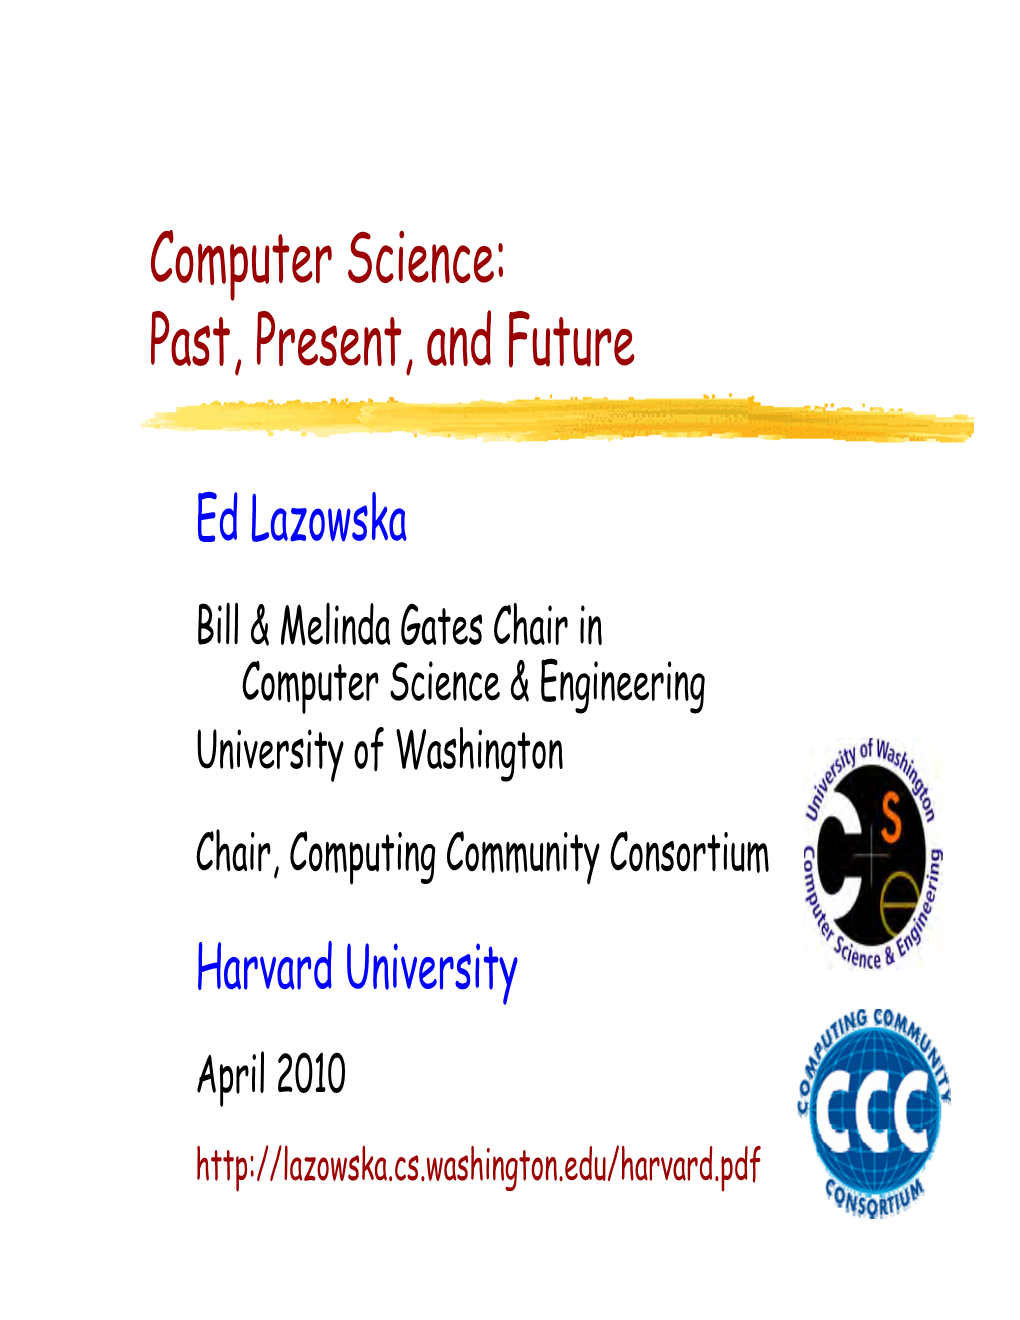 Computer Science: Past, Present, and Future